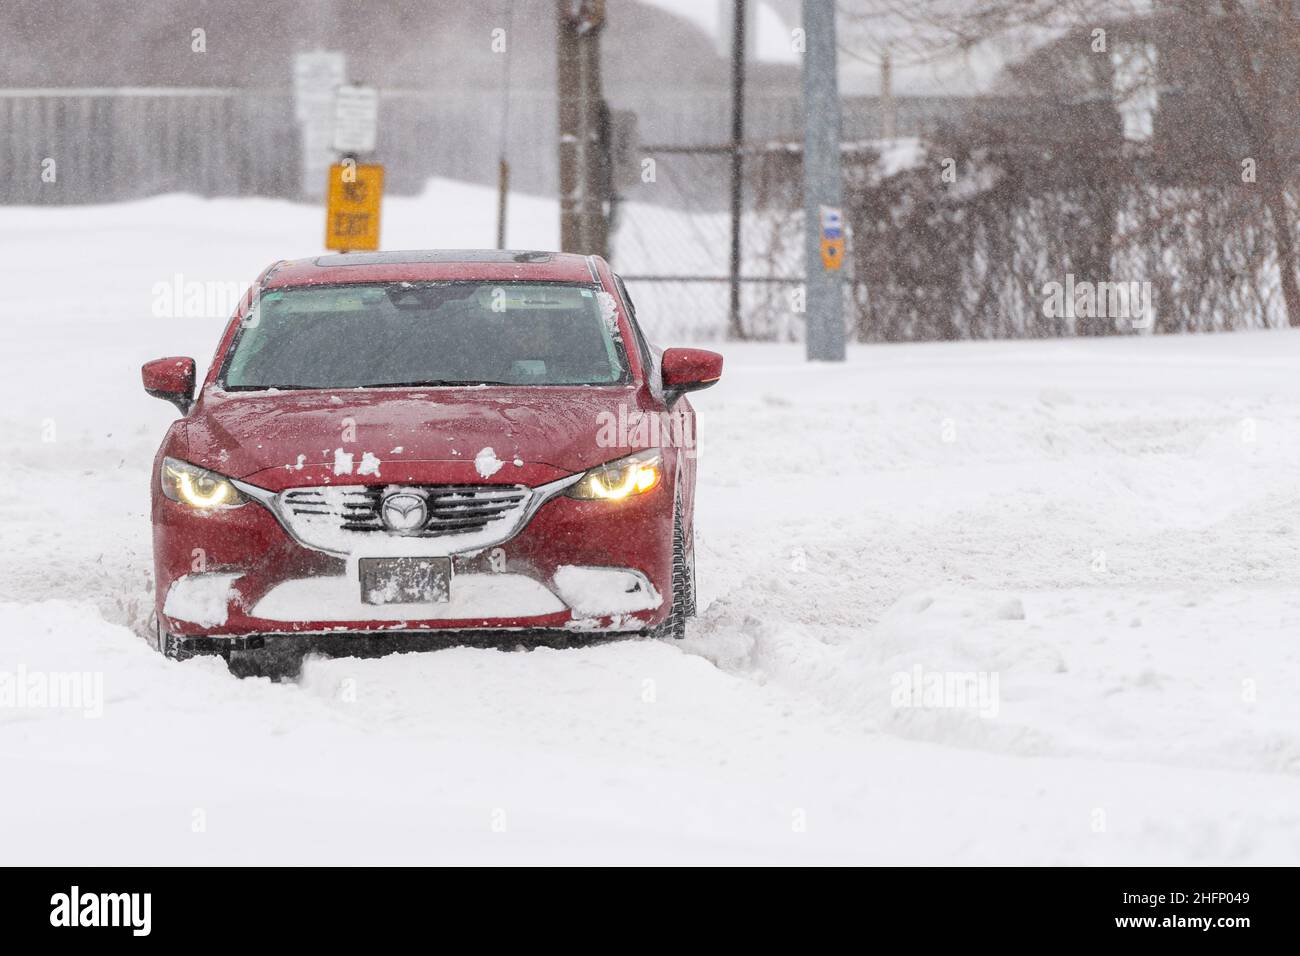 A red Mazda car turns from the snow-cleared Victoria Park Avenue towards the uncleared Terraview Blvd.  during a Winter snowstorm in Toronto, Canada Stock Photo